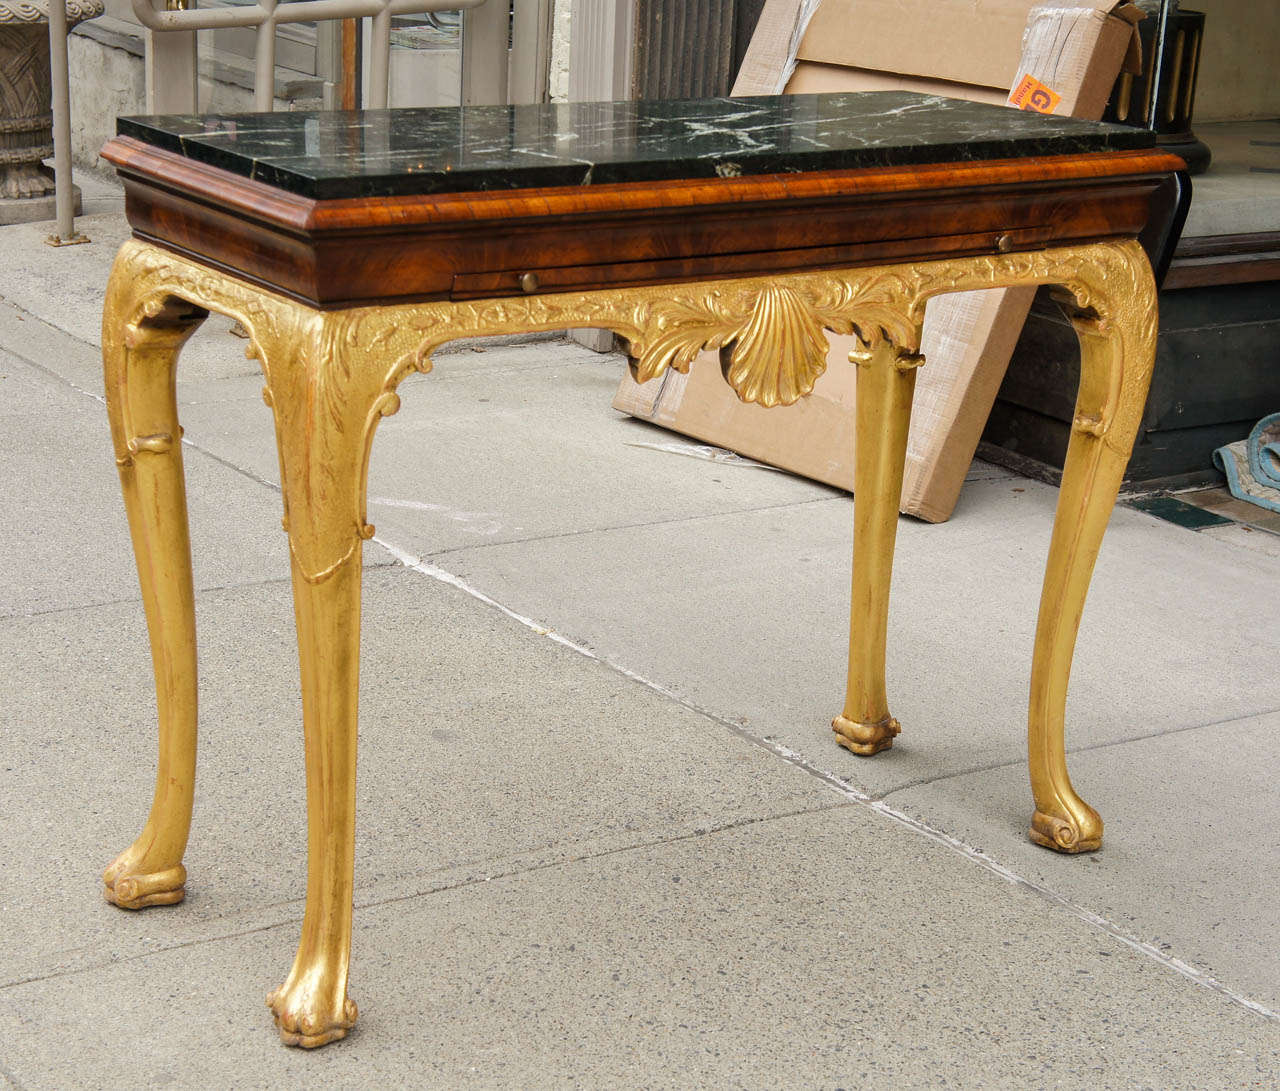 This table made in the Queen Anne style in England Circa 1860 was probably made as a companion piece to match an original table of the period creating a pair for a large stately home. No expense was spared at the time to achieve a rich and lustrous